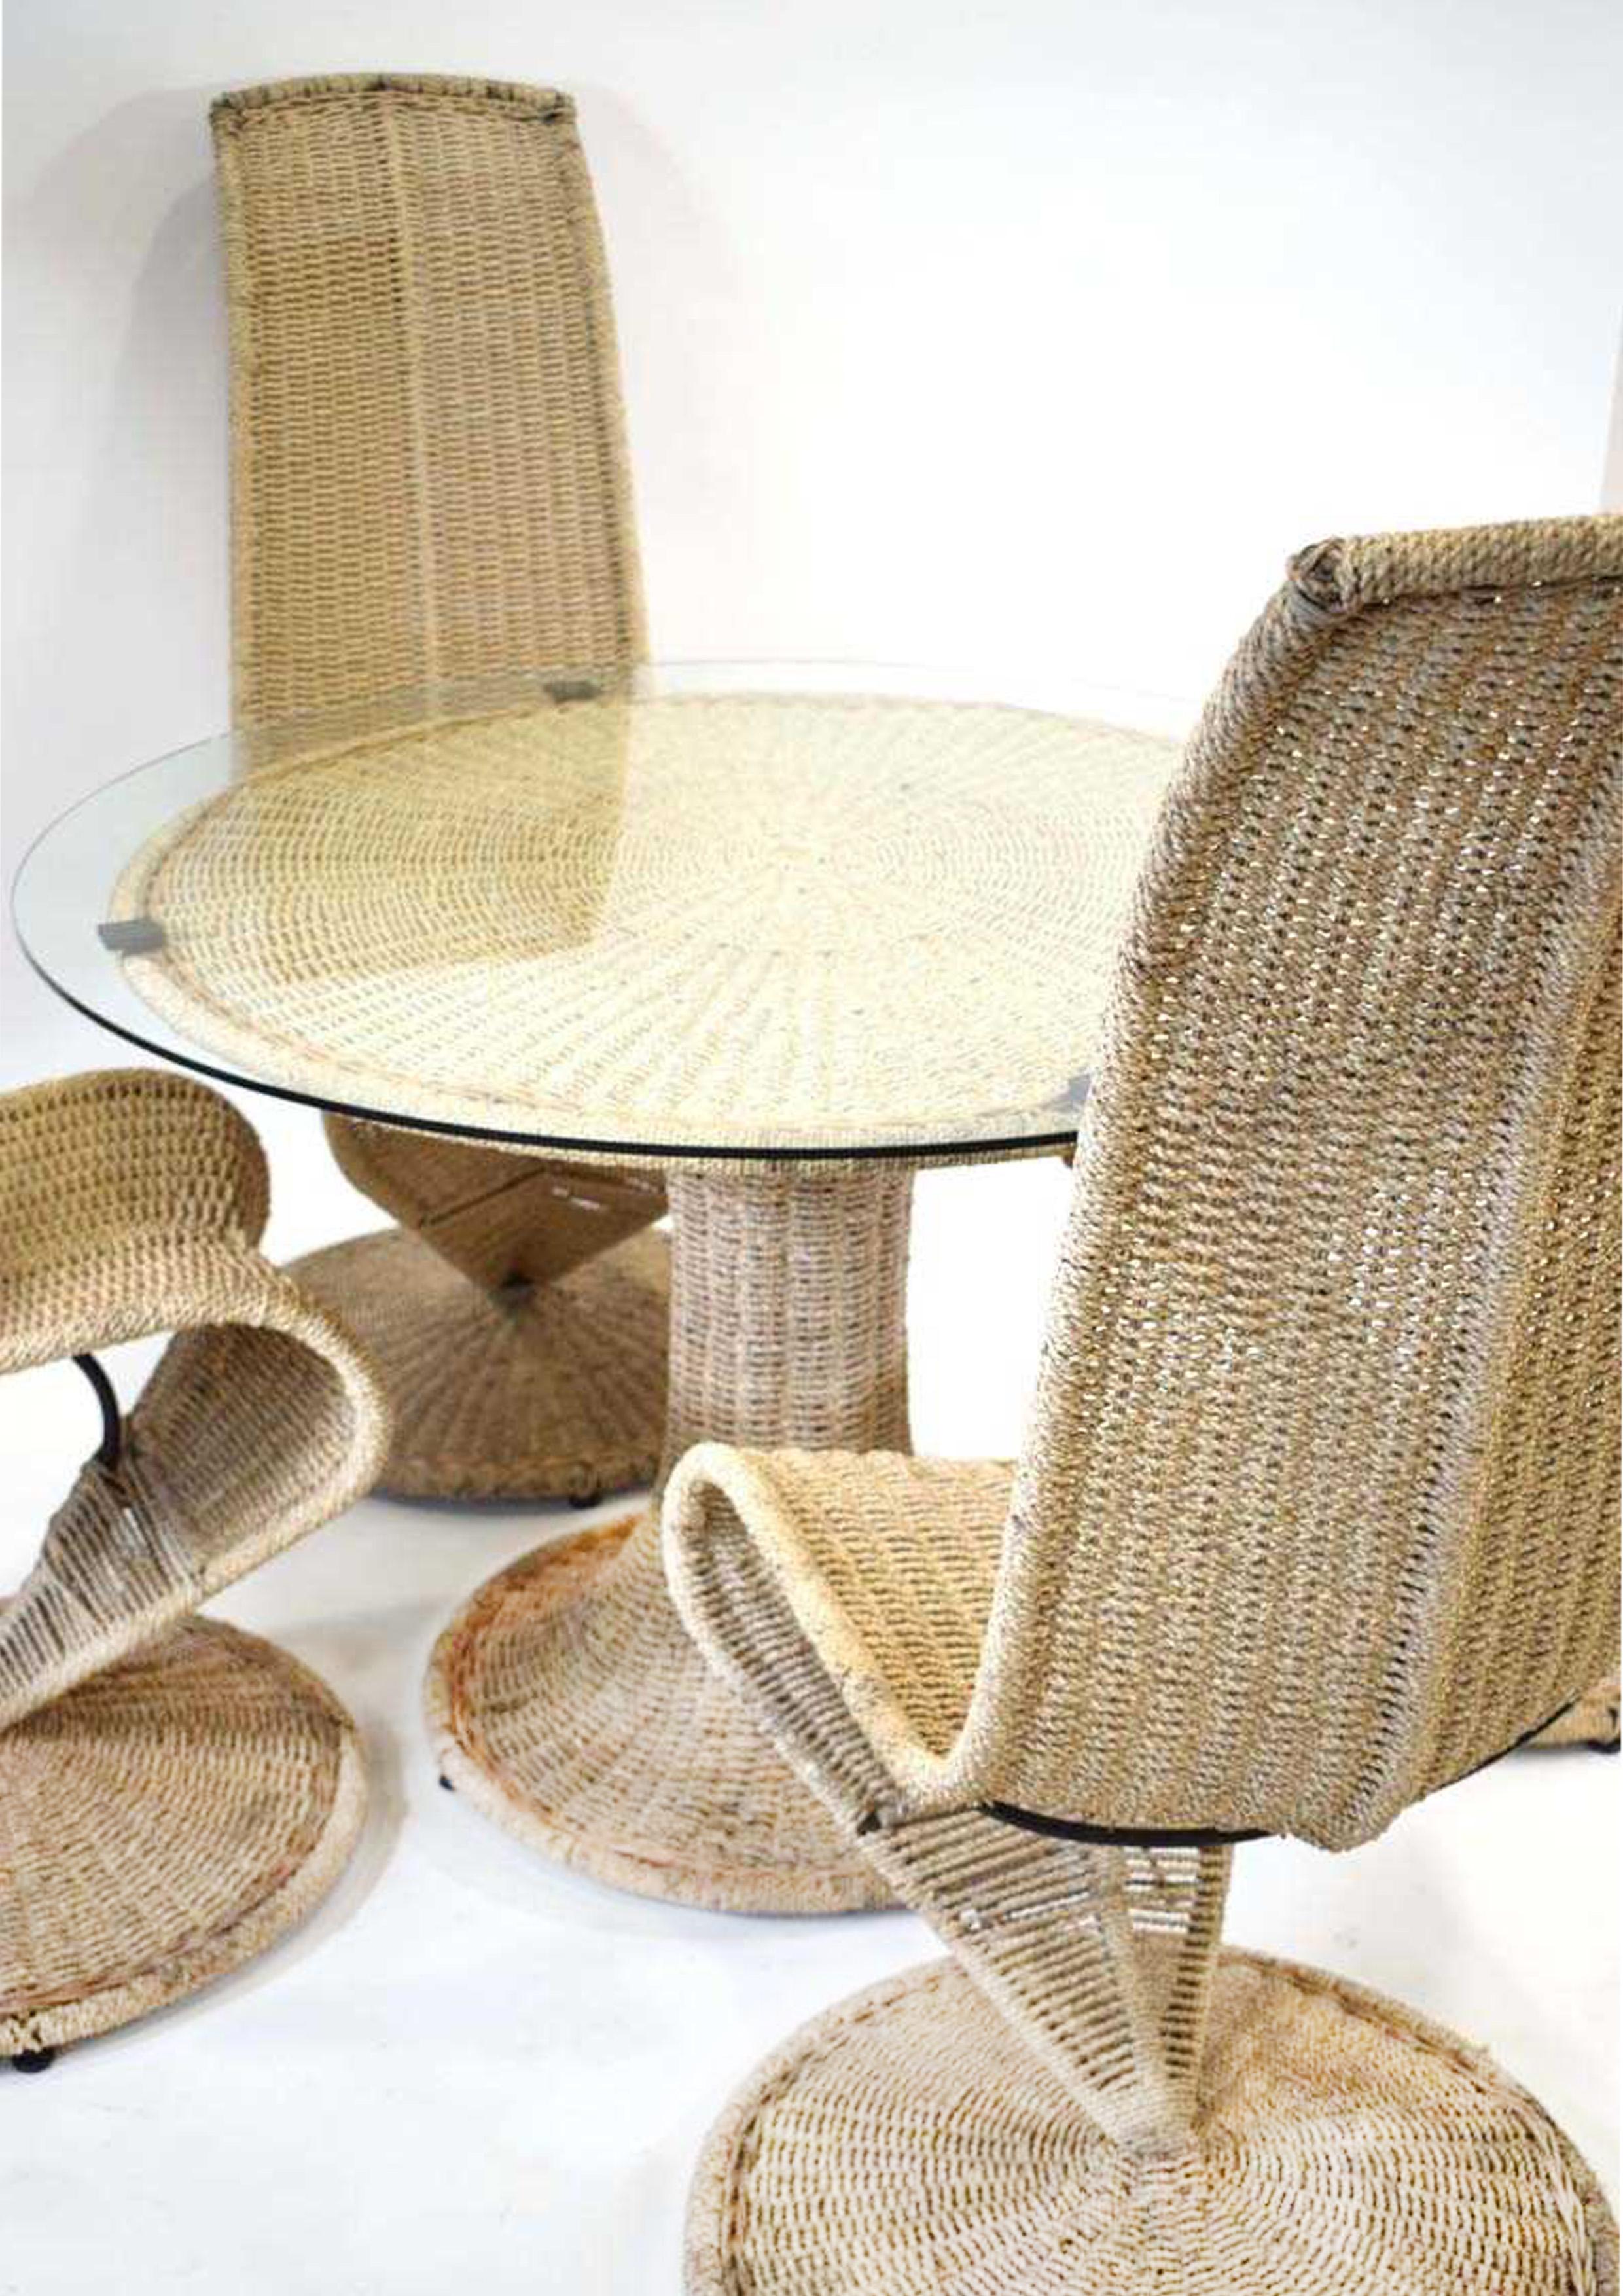 A Rare Marzio Cecchi Circular Glass, Metal & Wicker Pedestal Dining Table With A Set Of Four Woven S Chairs 1970's Made In Italy 1972 

Table diameter 111 cm

CHAIRS
Height 120cm
Width 62cm
Depth 60cm

The table is seldom seen, i've personally not